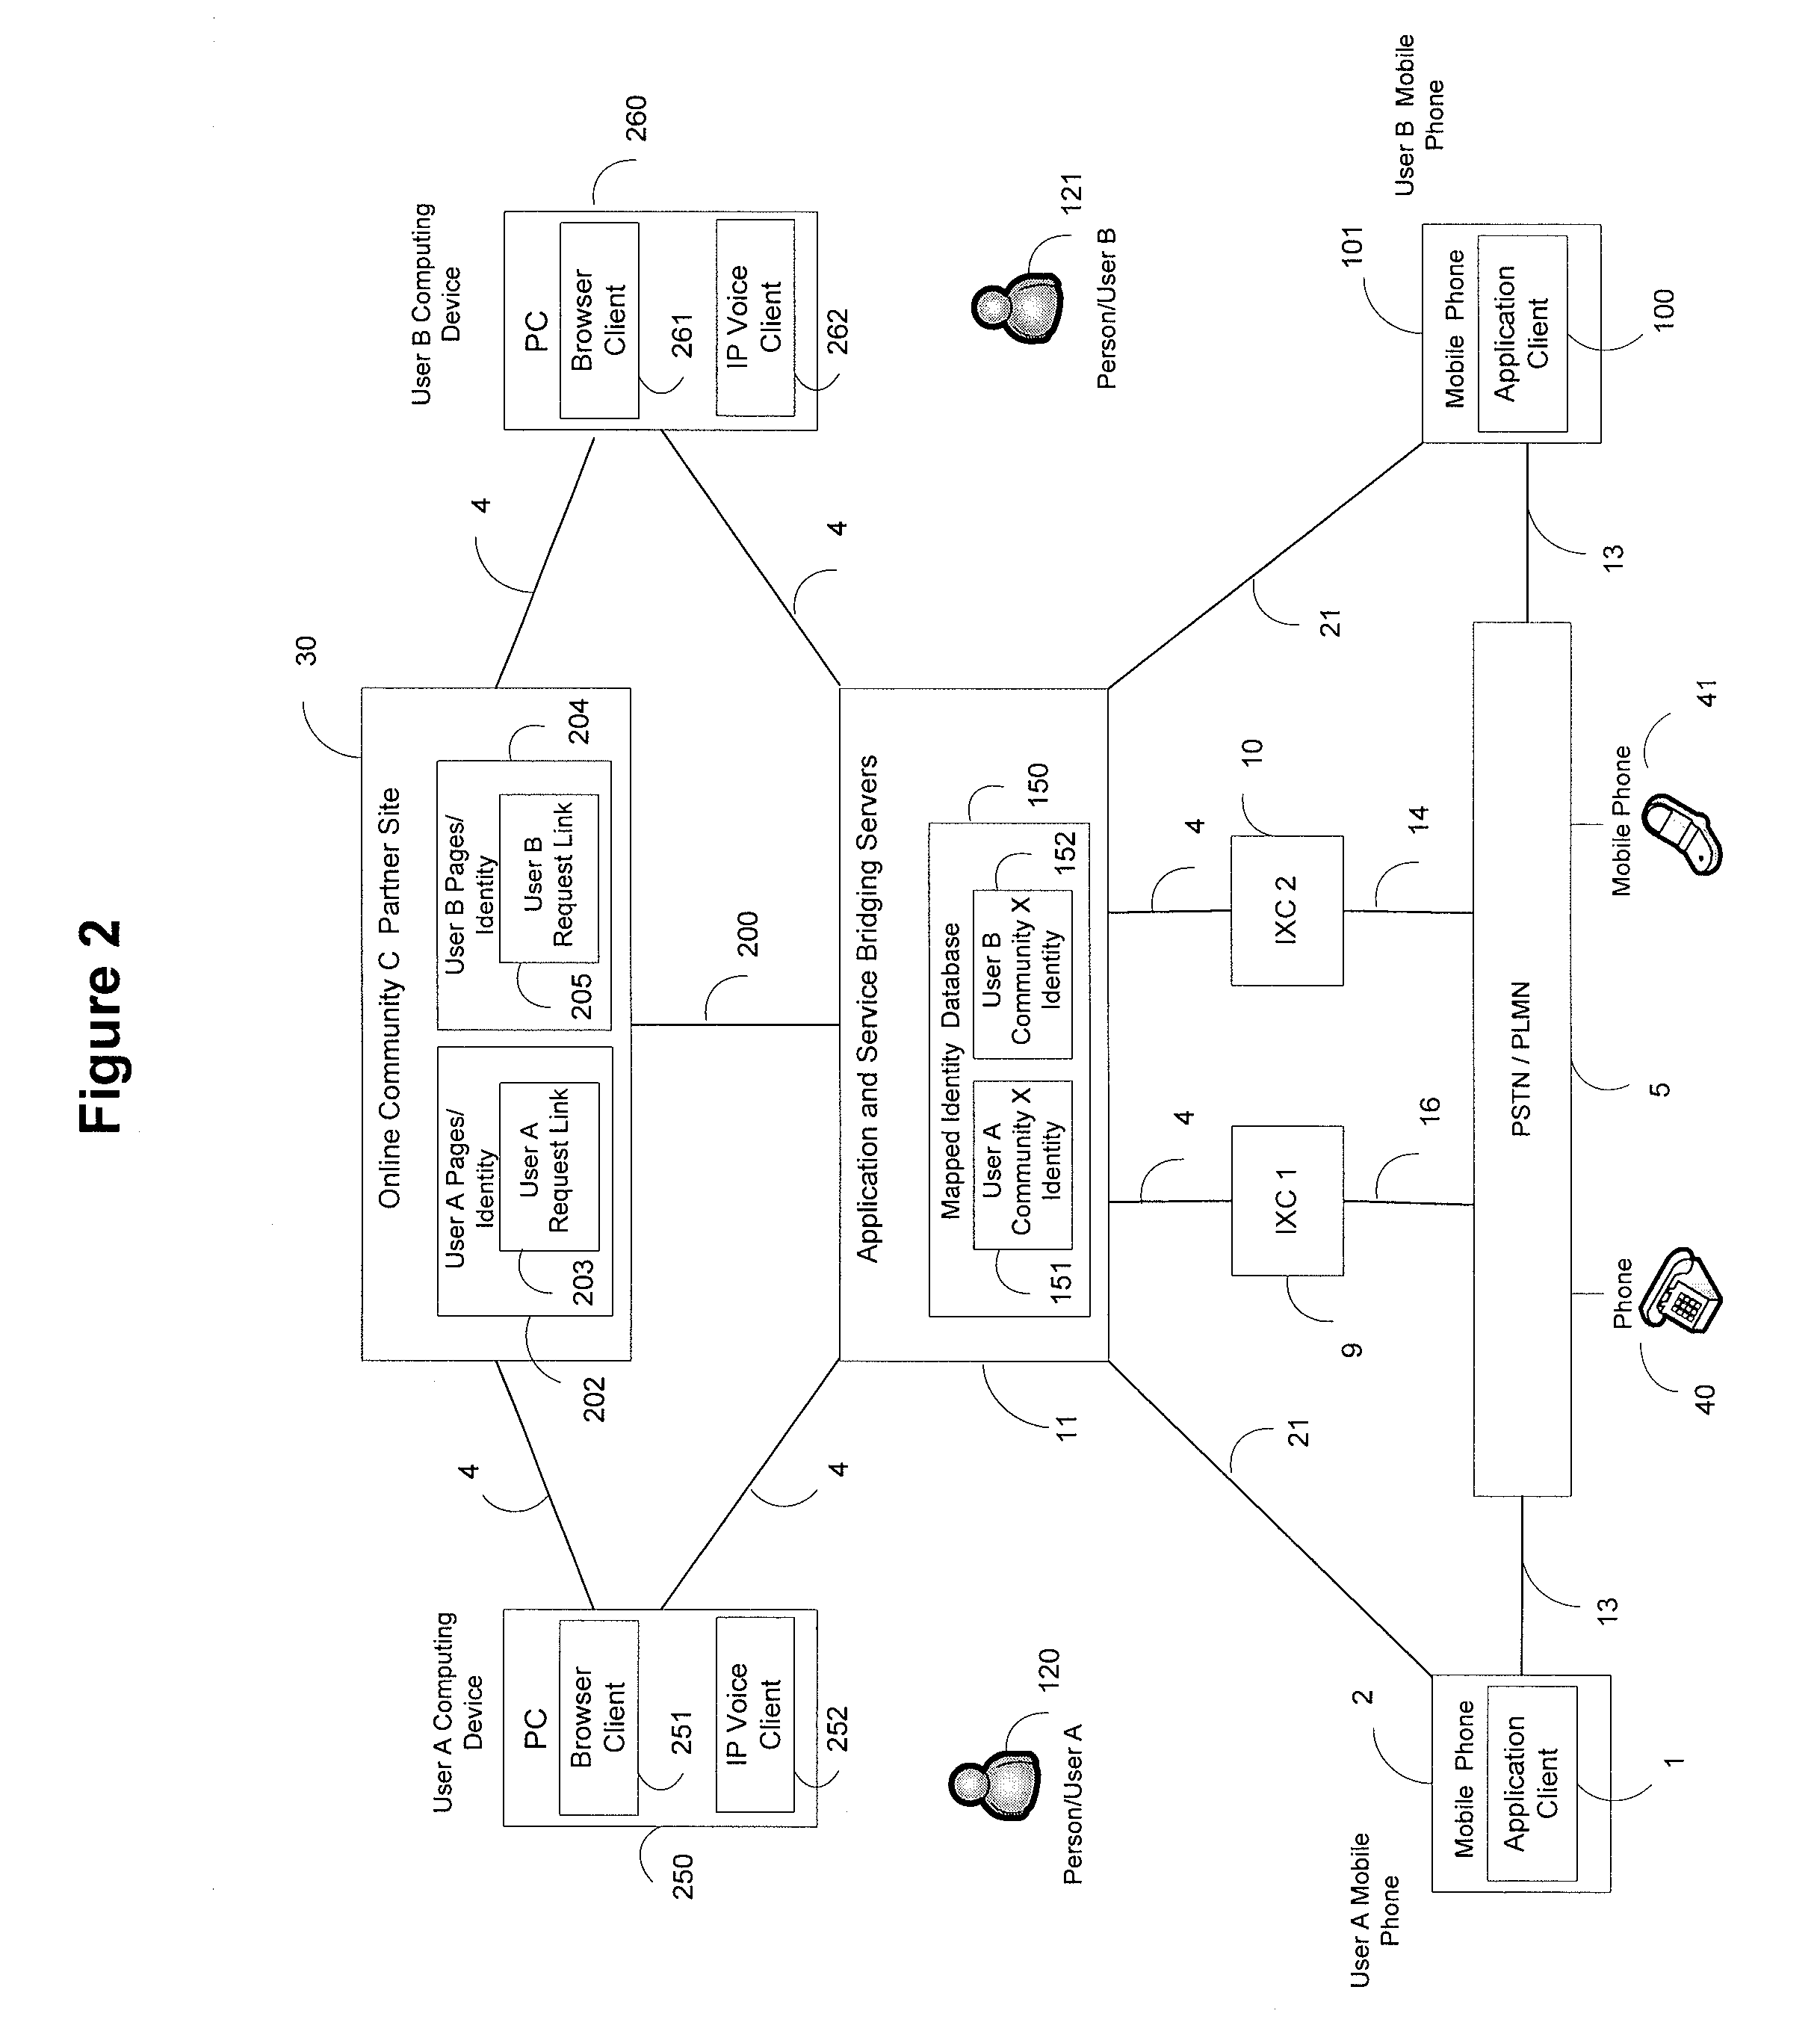 System and methods for using online community identities of users to establish mobile communication sessions